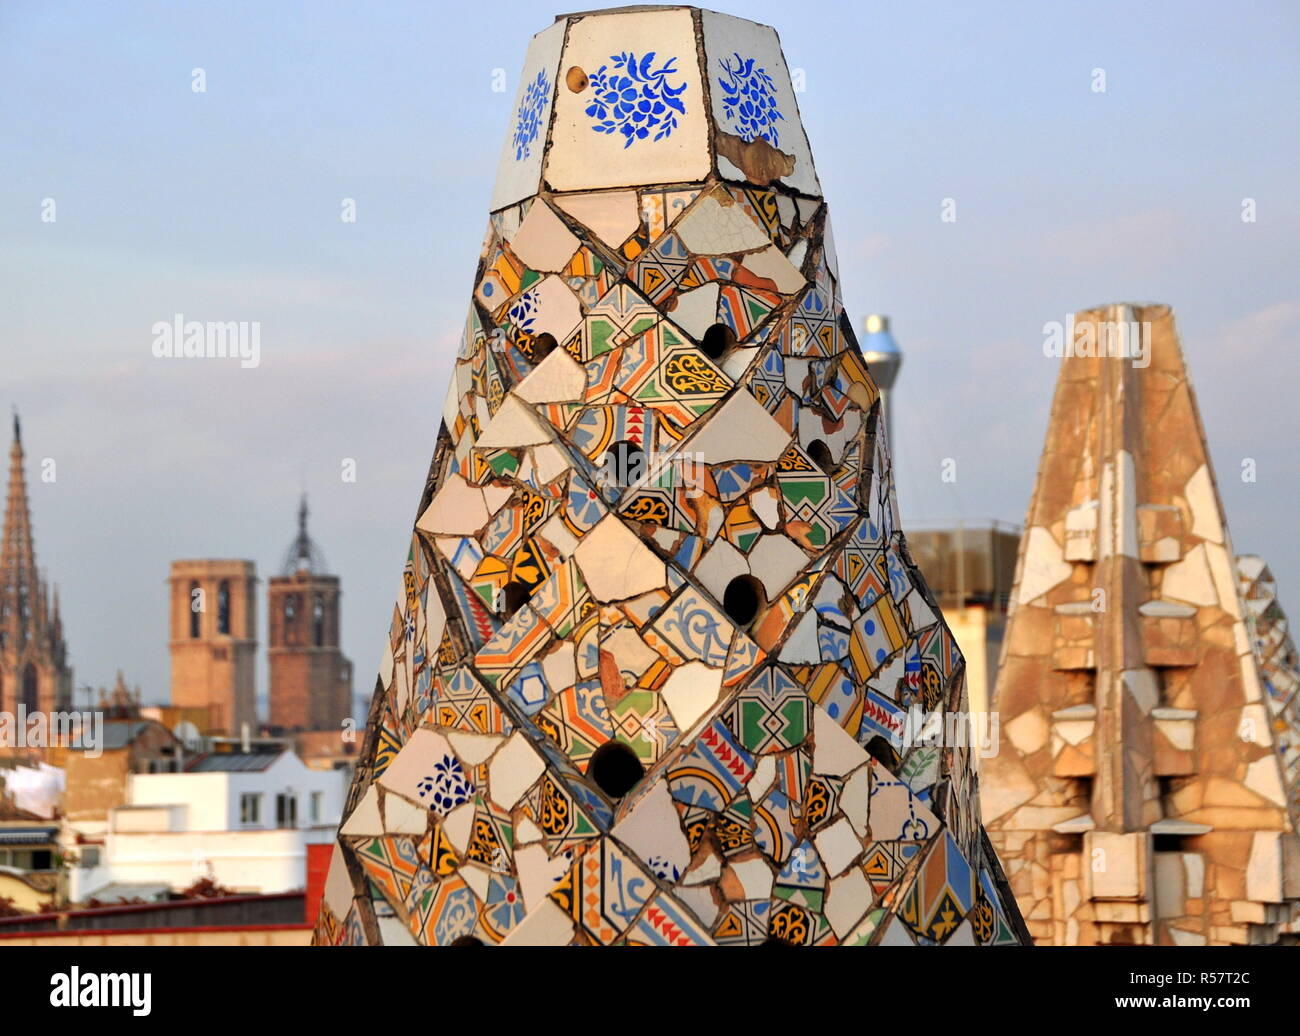 colorful chimneys with a wonderful view on the roof of gaudi's palau gÃ¼ell Stock Photo